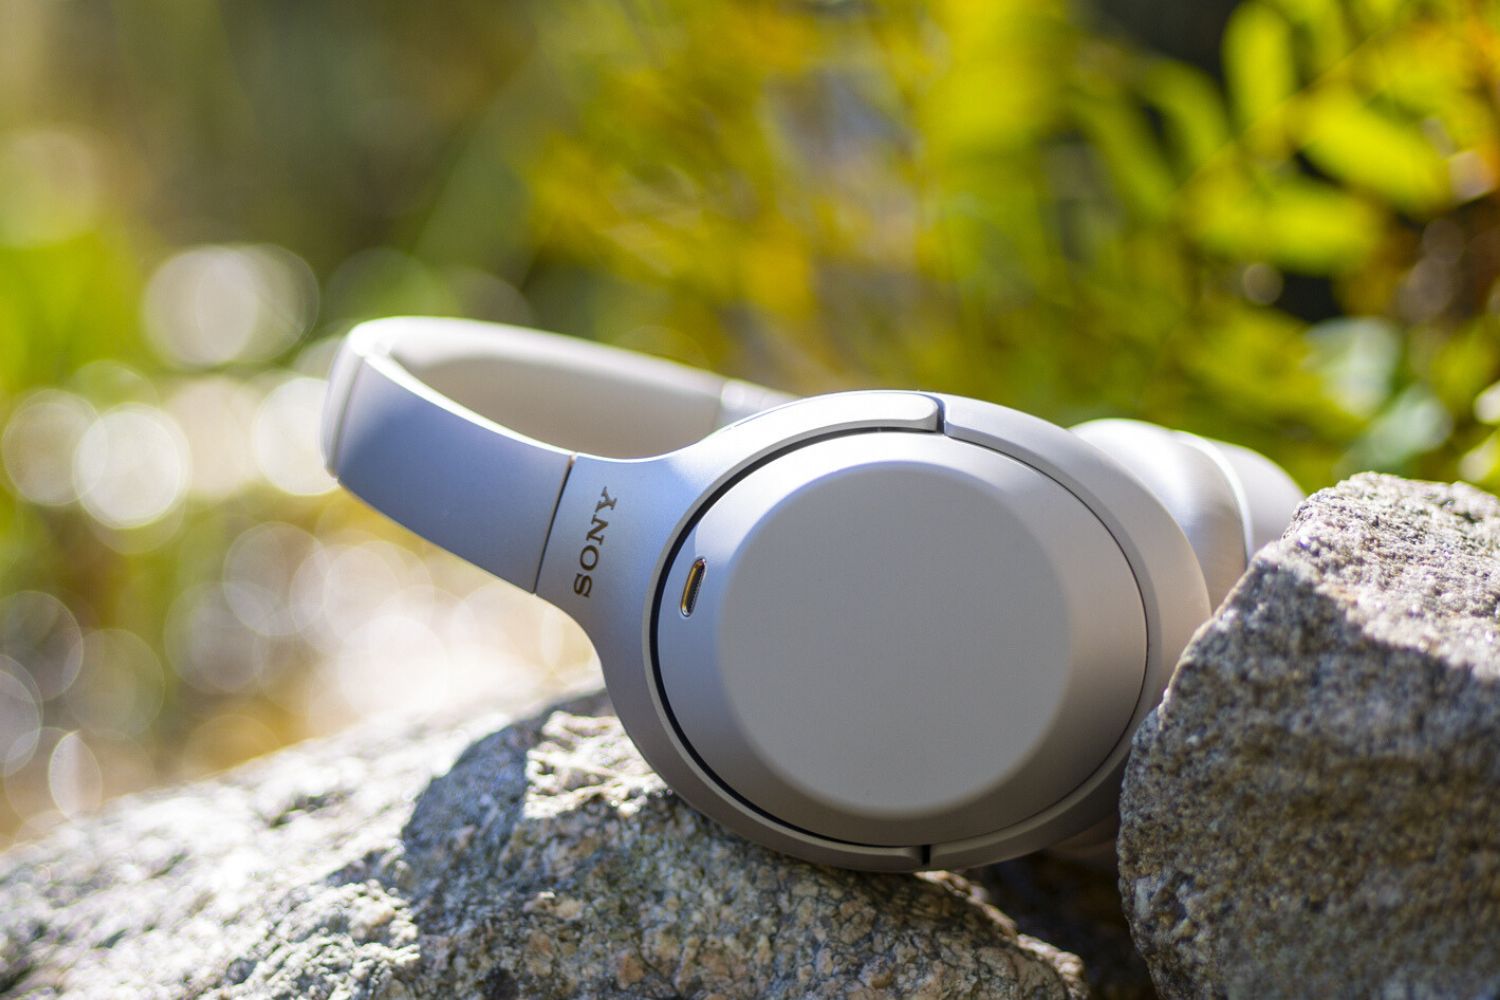 How To Use WH-1000XM3 Wireless Noise Cancelling Headphones